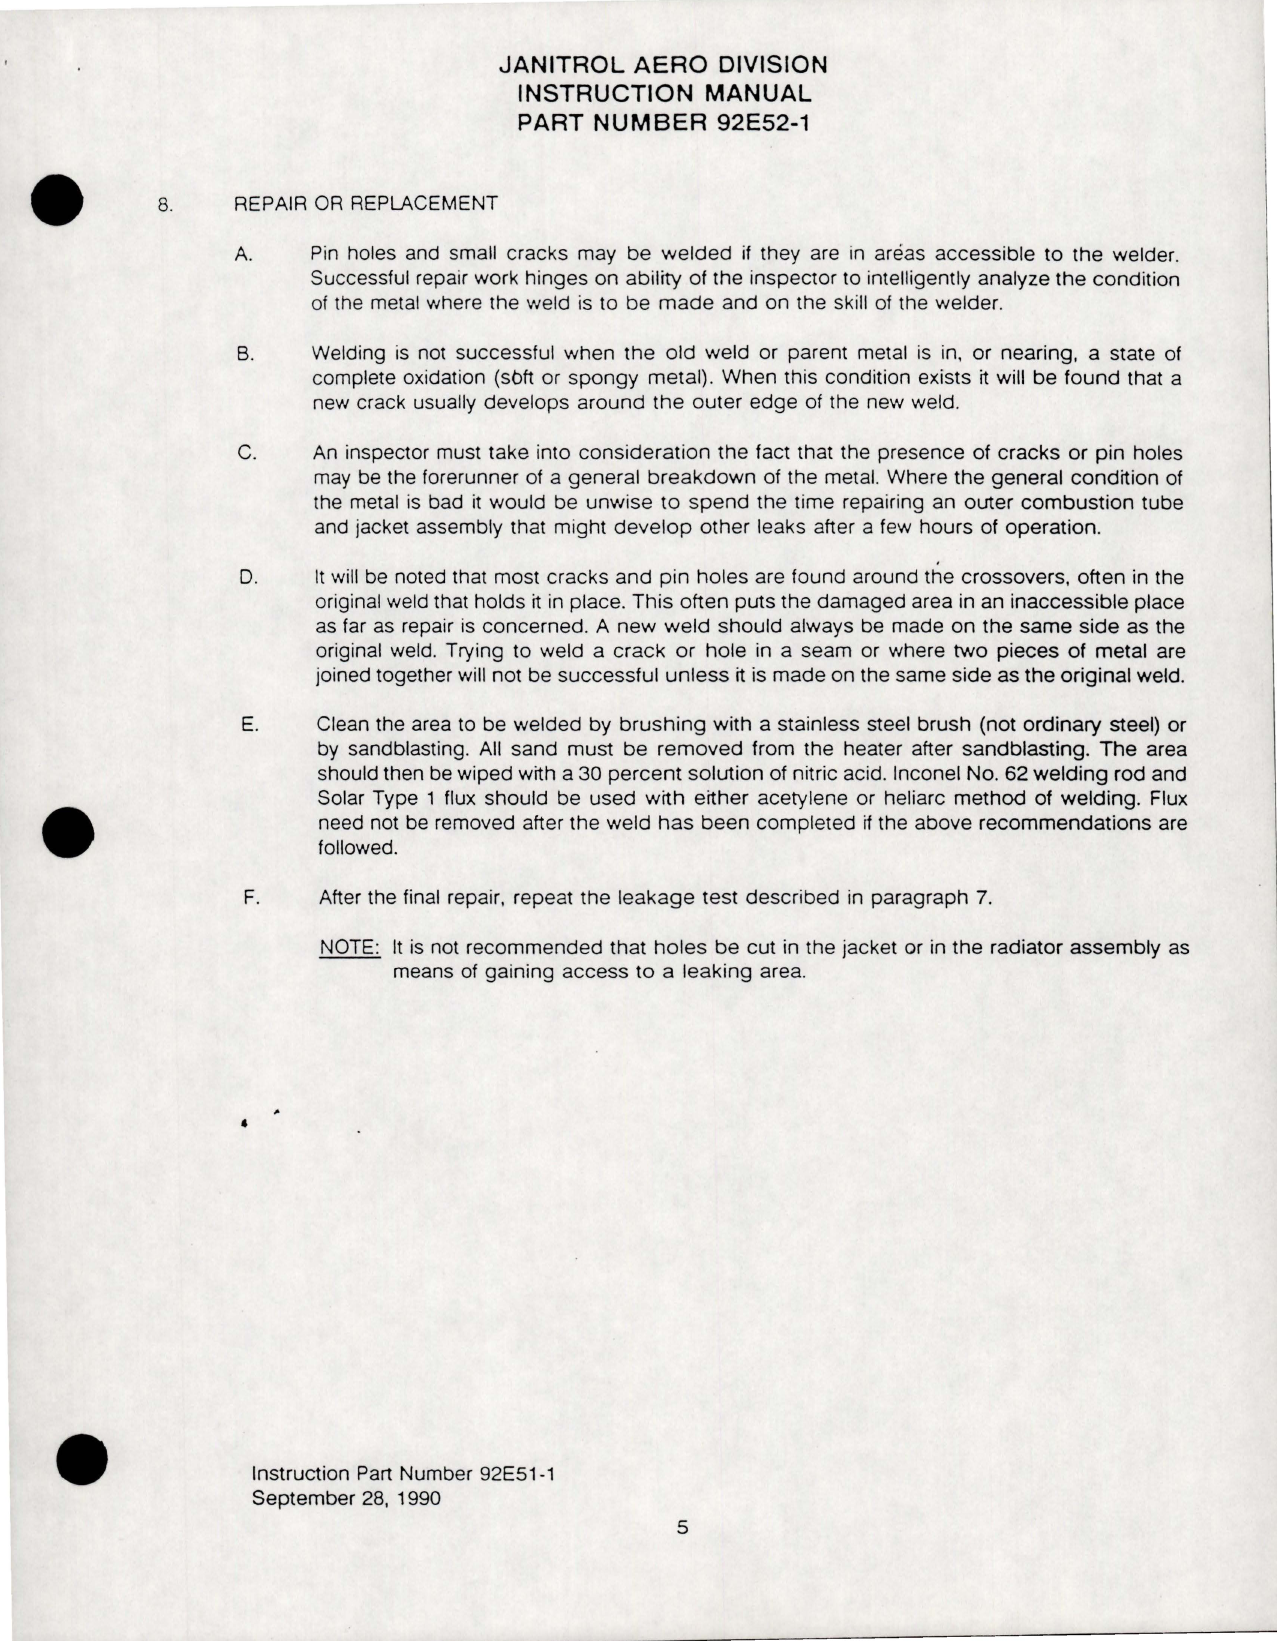 Sample page 5 from AirCorps Library document: Modification Instructions for Heater Modification Kit - Part 92E52-1 